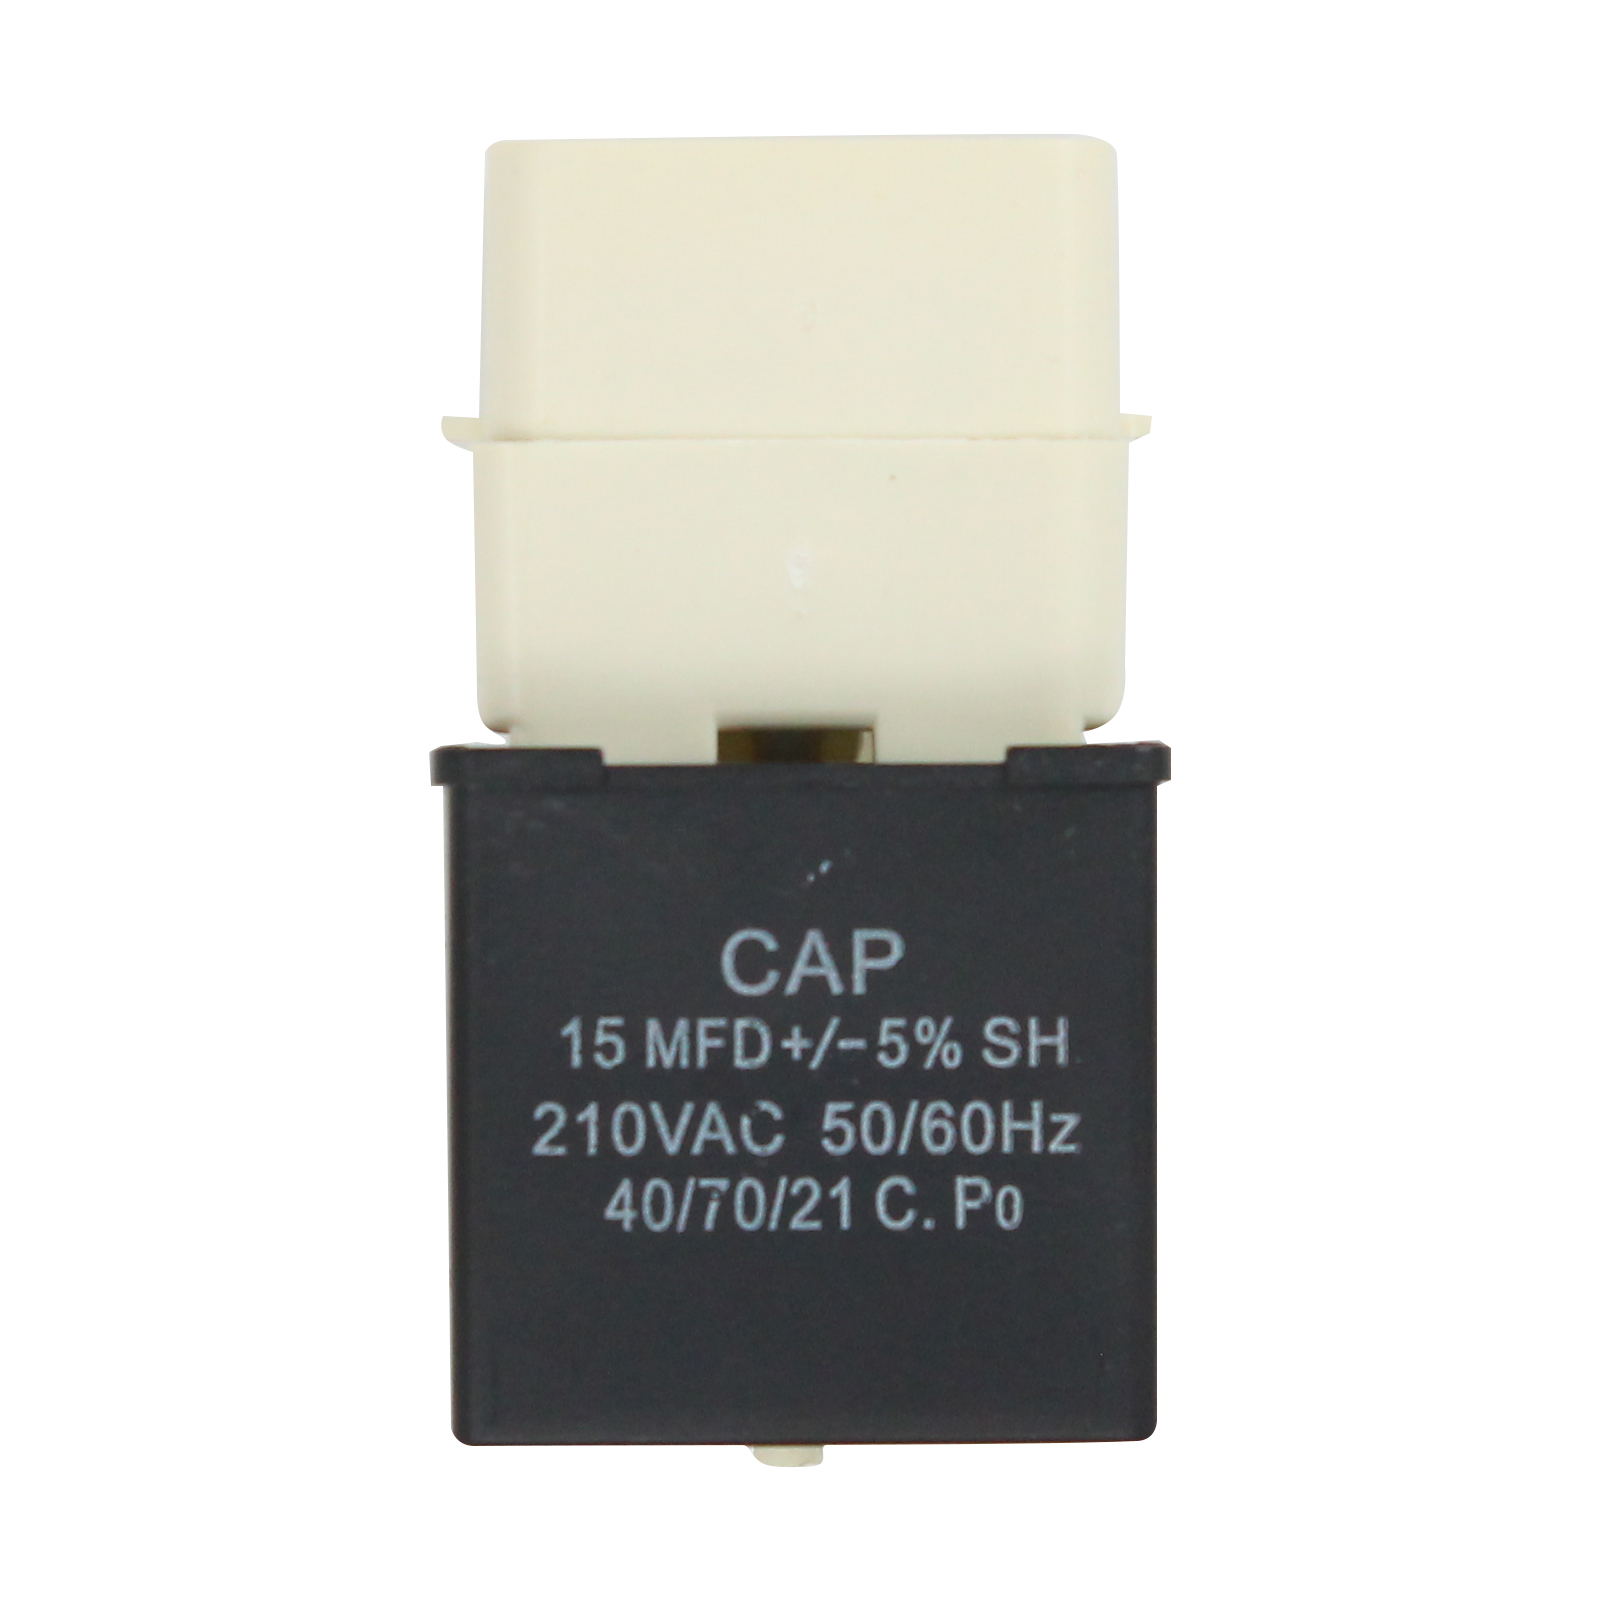 W10613606 Refrigerator Compressor Start Relay & Capacitor Replacement for Kenmore / Sears 59653469301 Refrigerator - Compatible with W10613606 Start Device Relay Overload With Capacitor - image 2 of 4